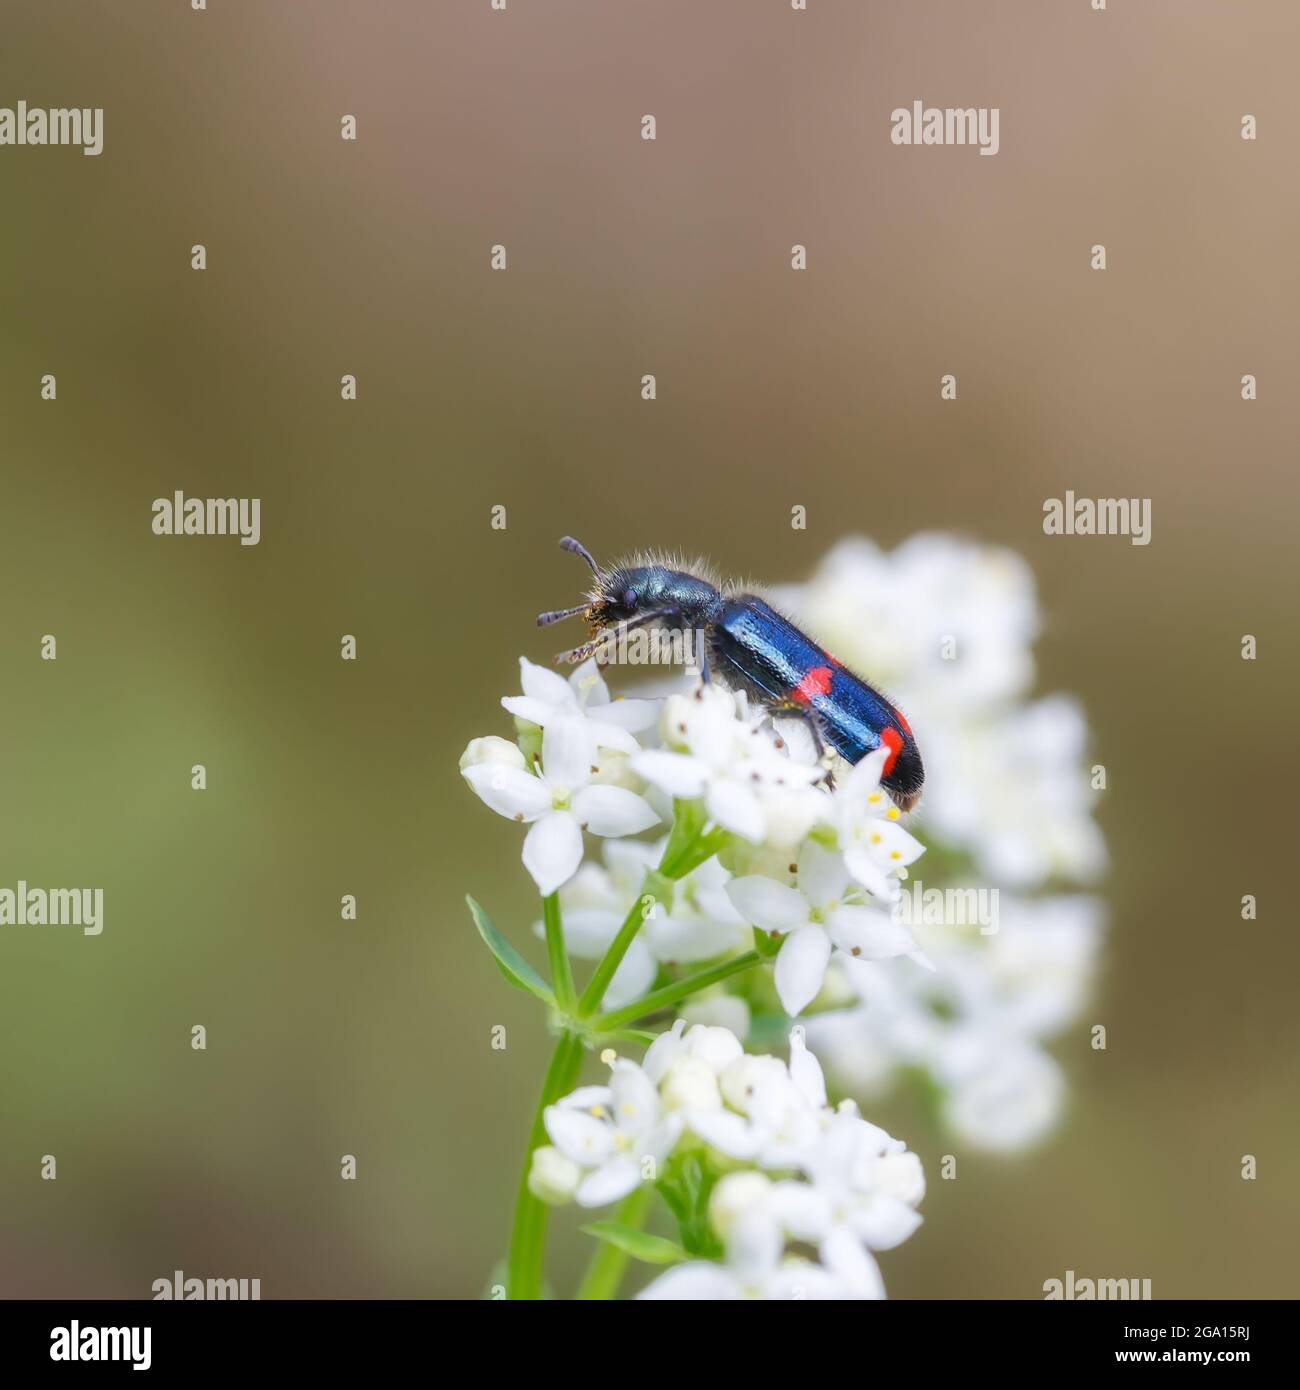 Red-blue shaggy beetle on white flowers, with blurred background, close-up Stock Photo